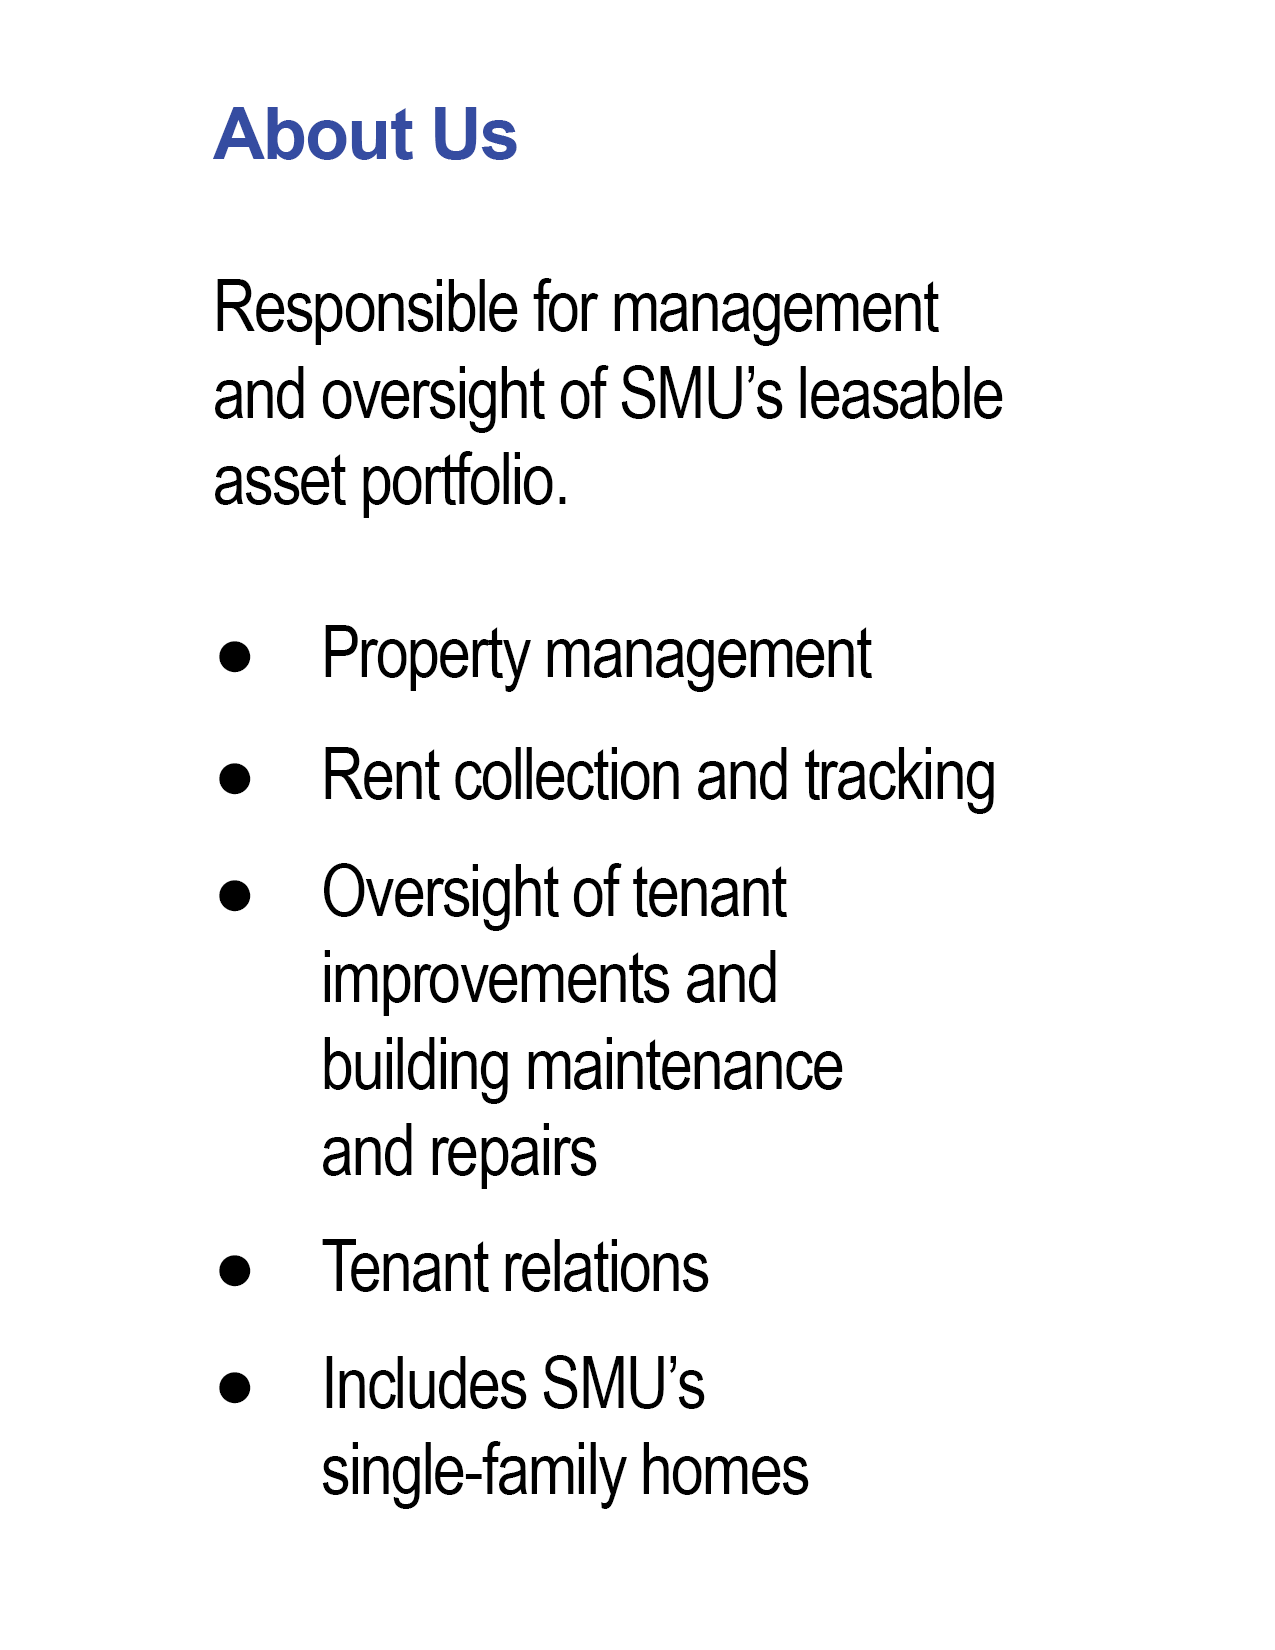 About Us - Property Management information